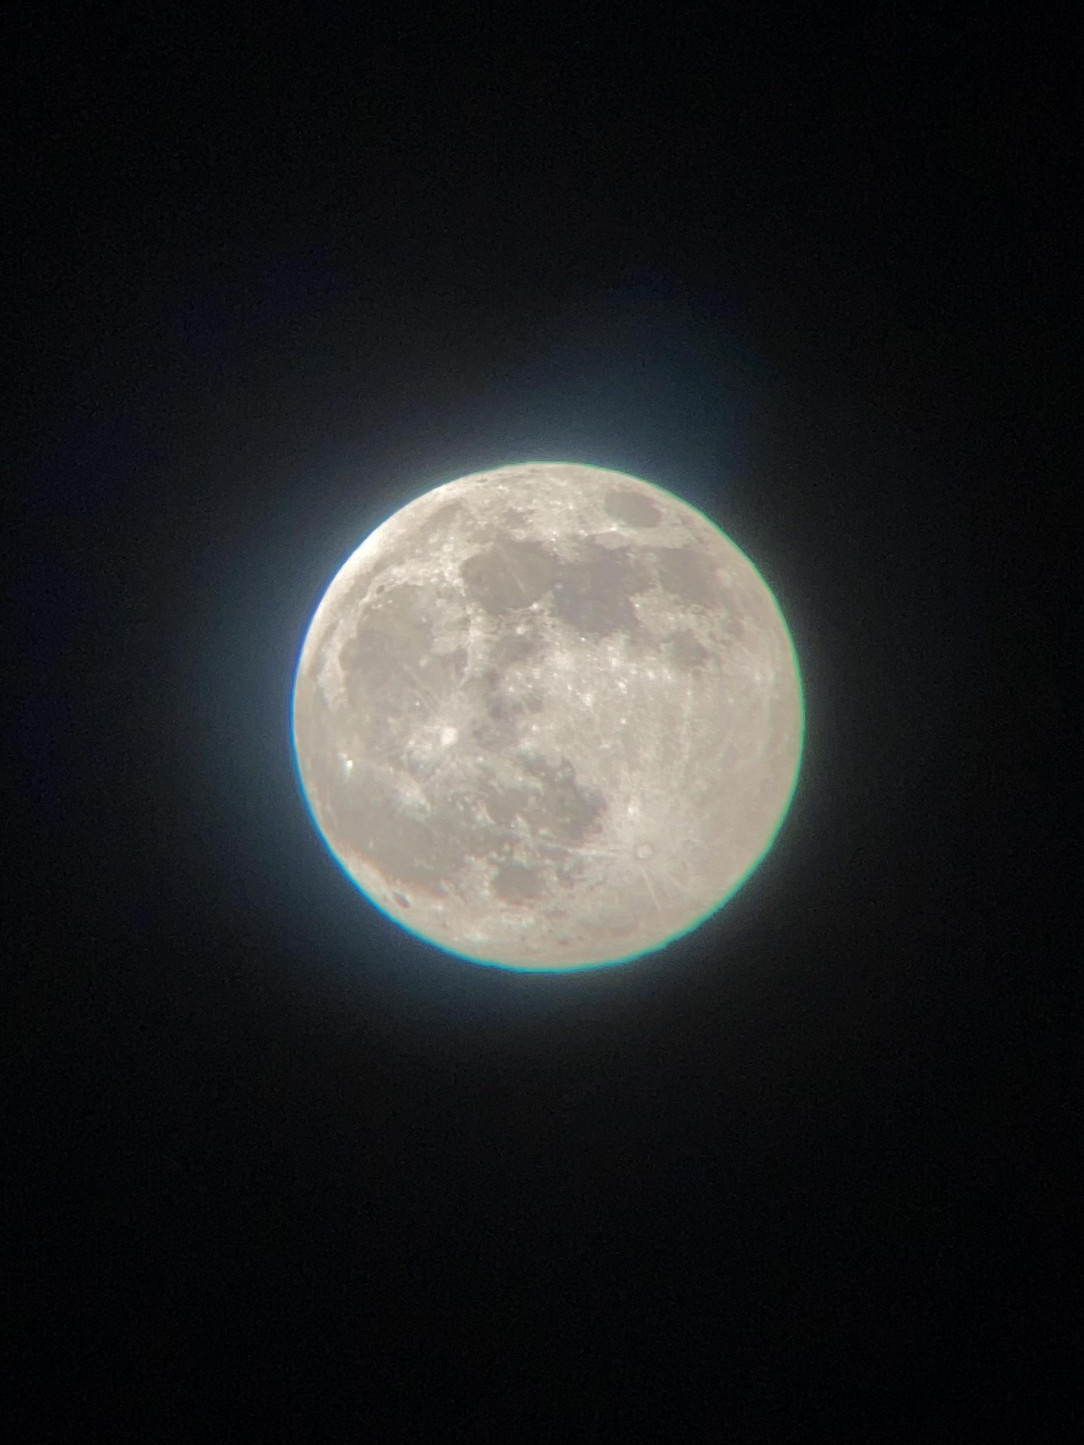 The best picture of the moon I (15F) have taken so far! - 26.04.21